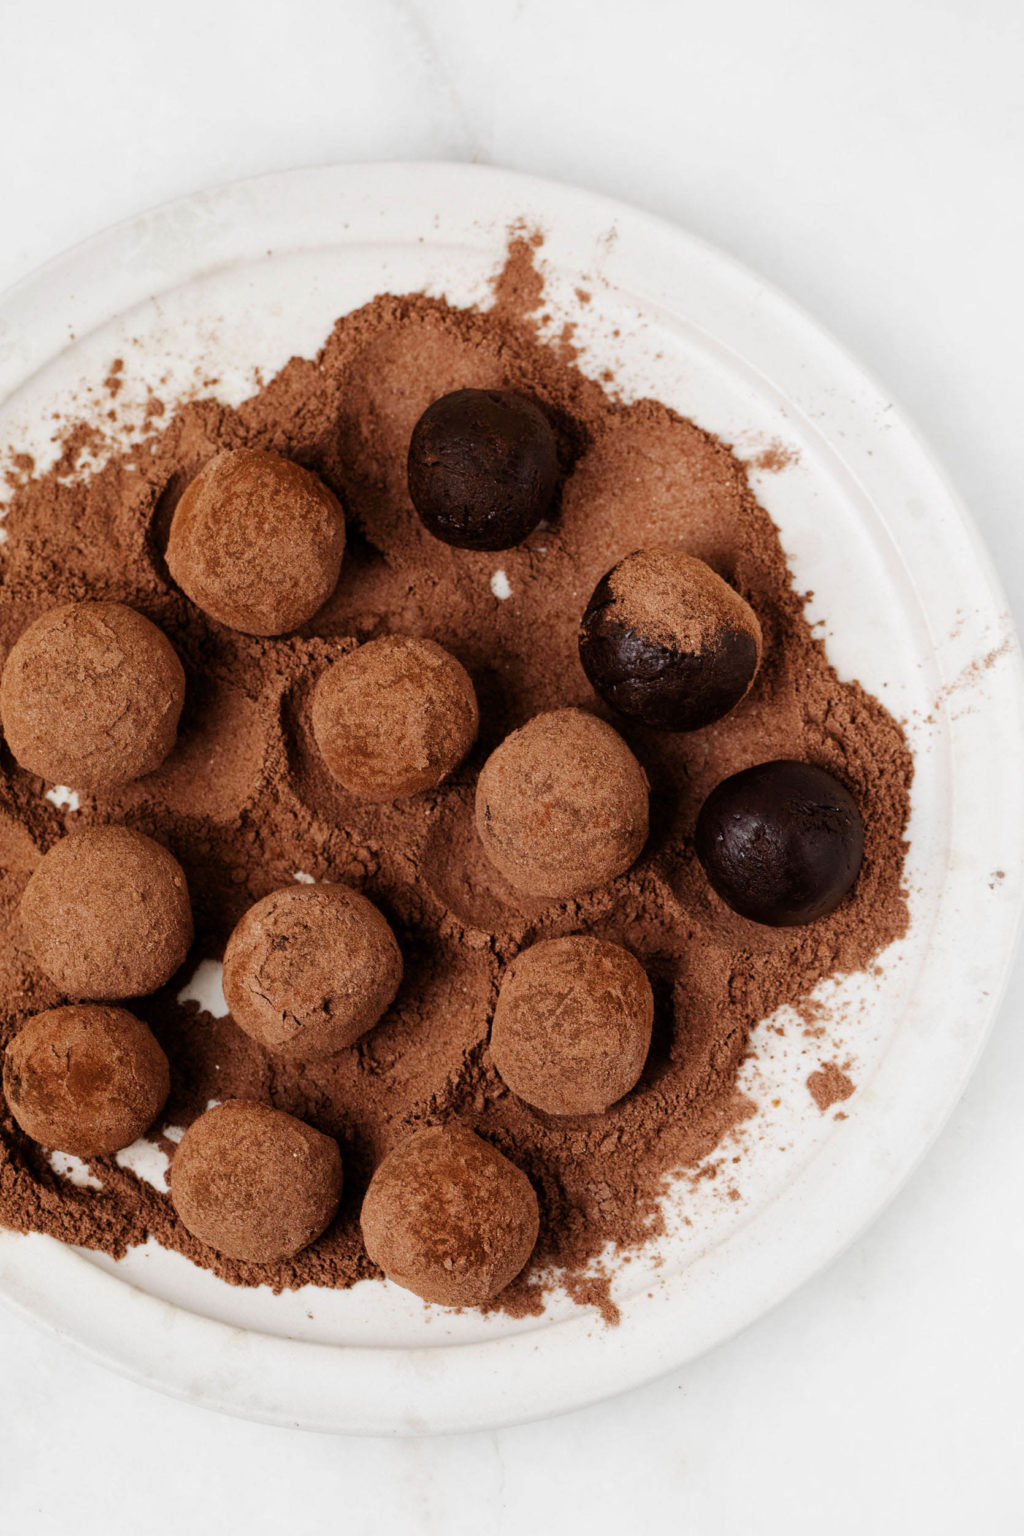 Chocolate truffles are being rolled in cocoa powder.